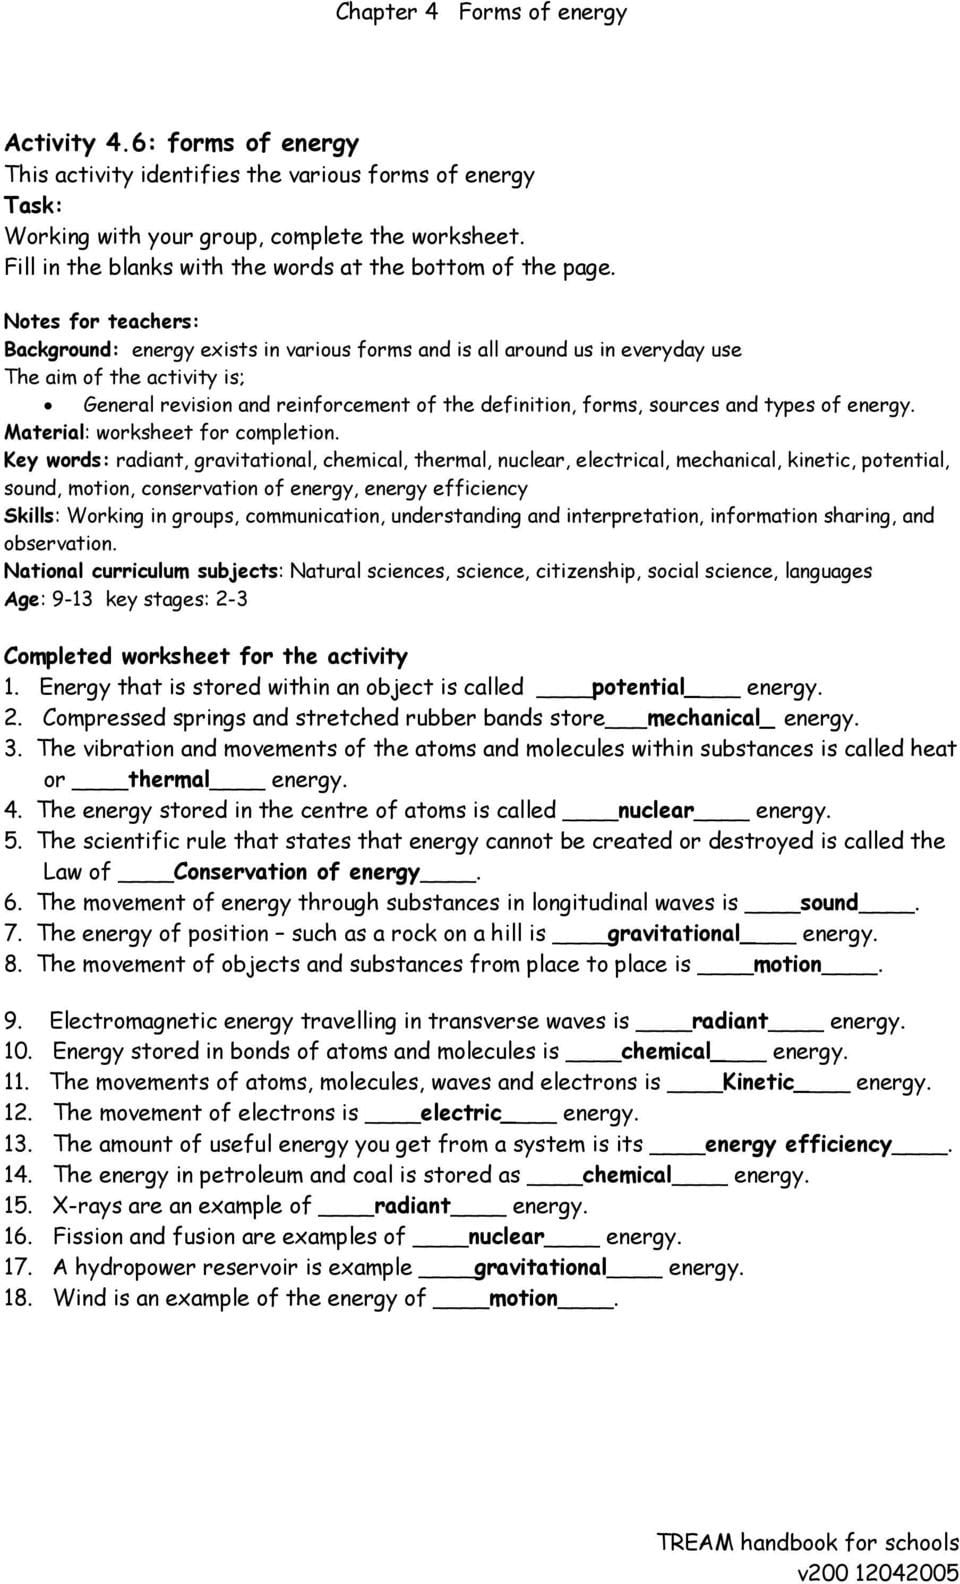 Chapter 4 Forms Of Energy  Pdf For Forms Of Energy Worksheet Answers